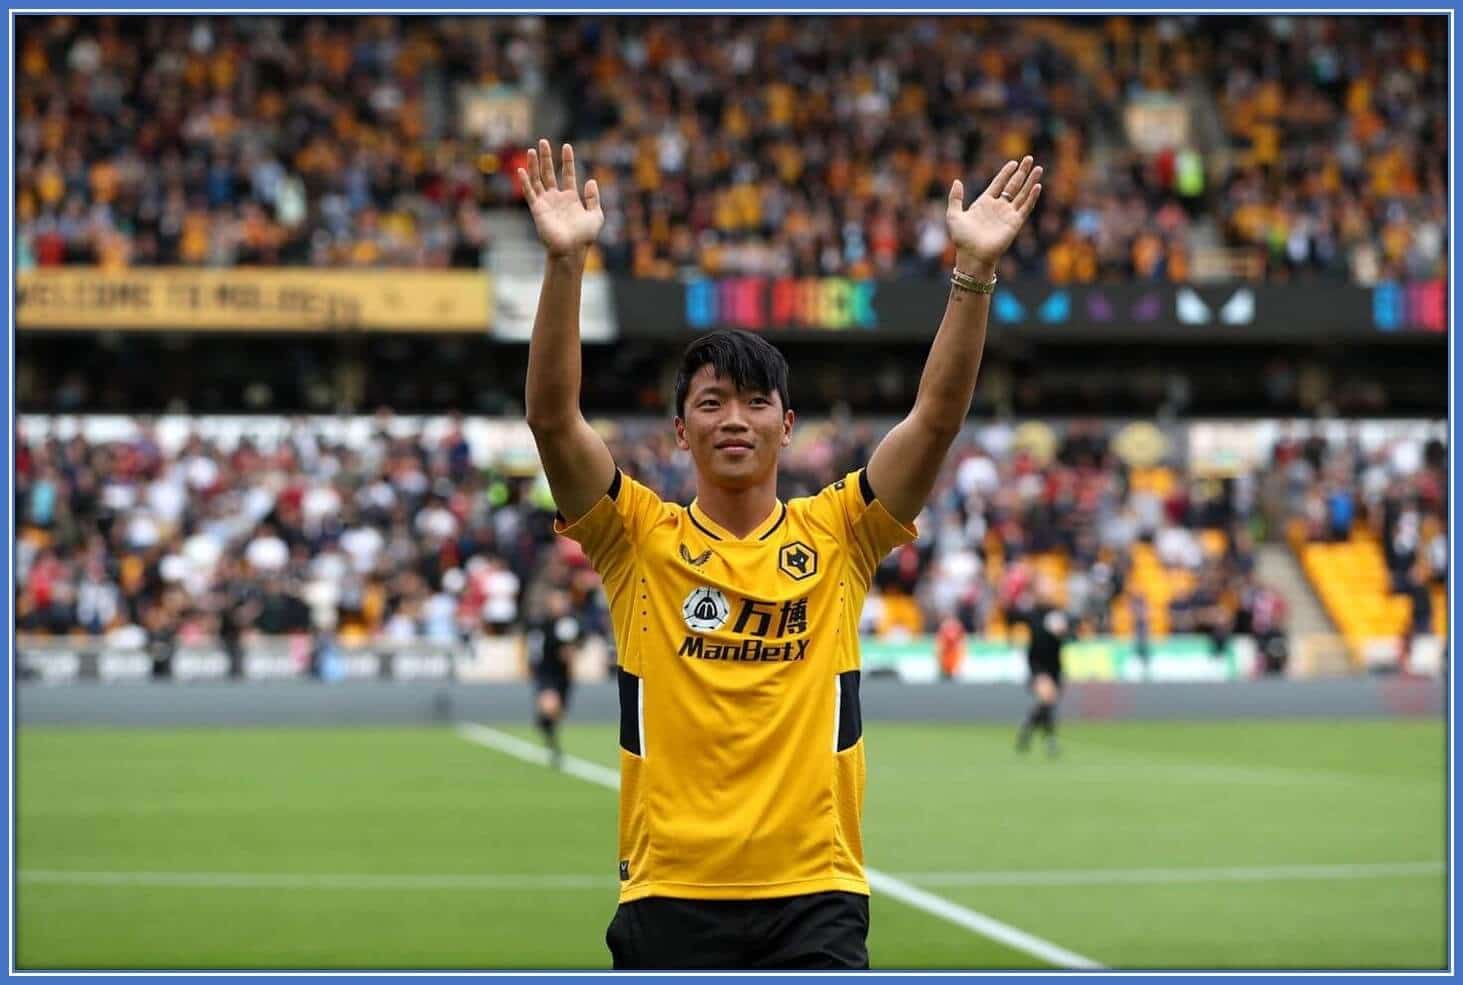 From the look of things, you can tell that he received a warm welcome to Molineux Stadium. We hope he has a nice stay at Wolverhampton.